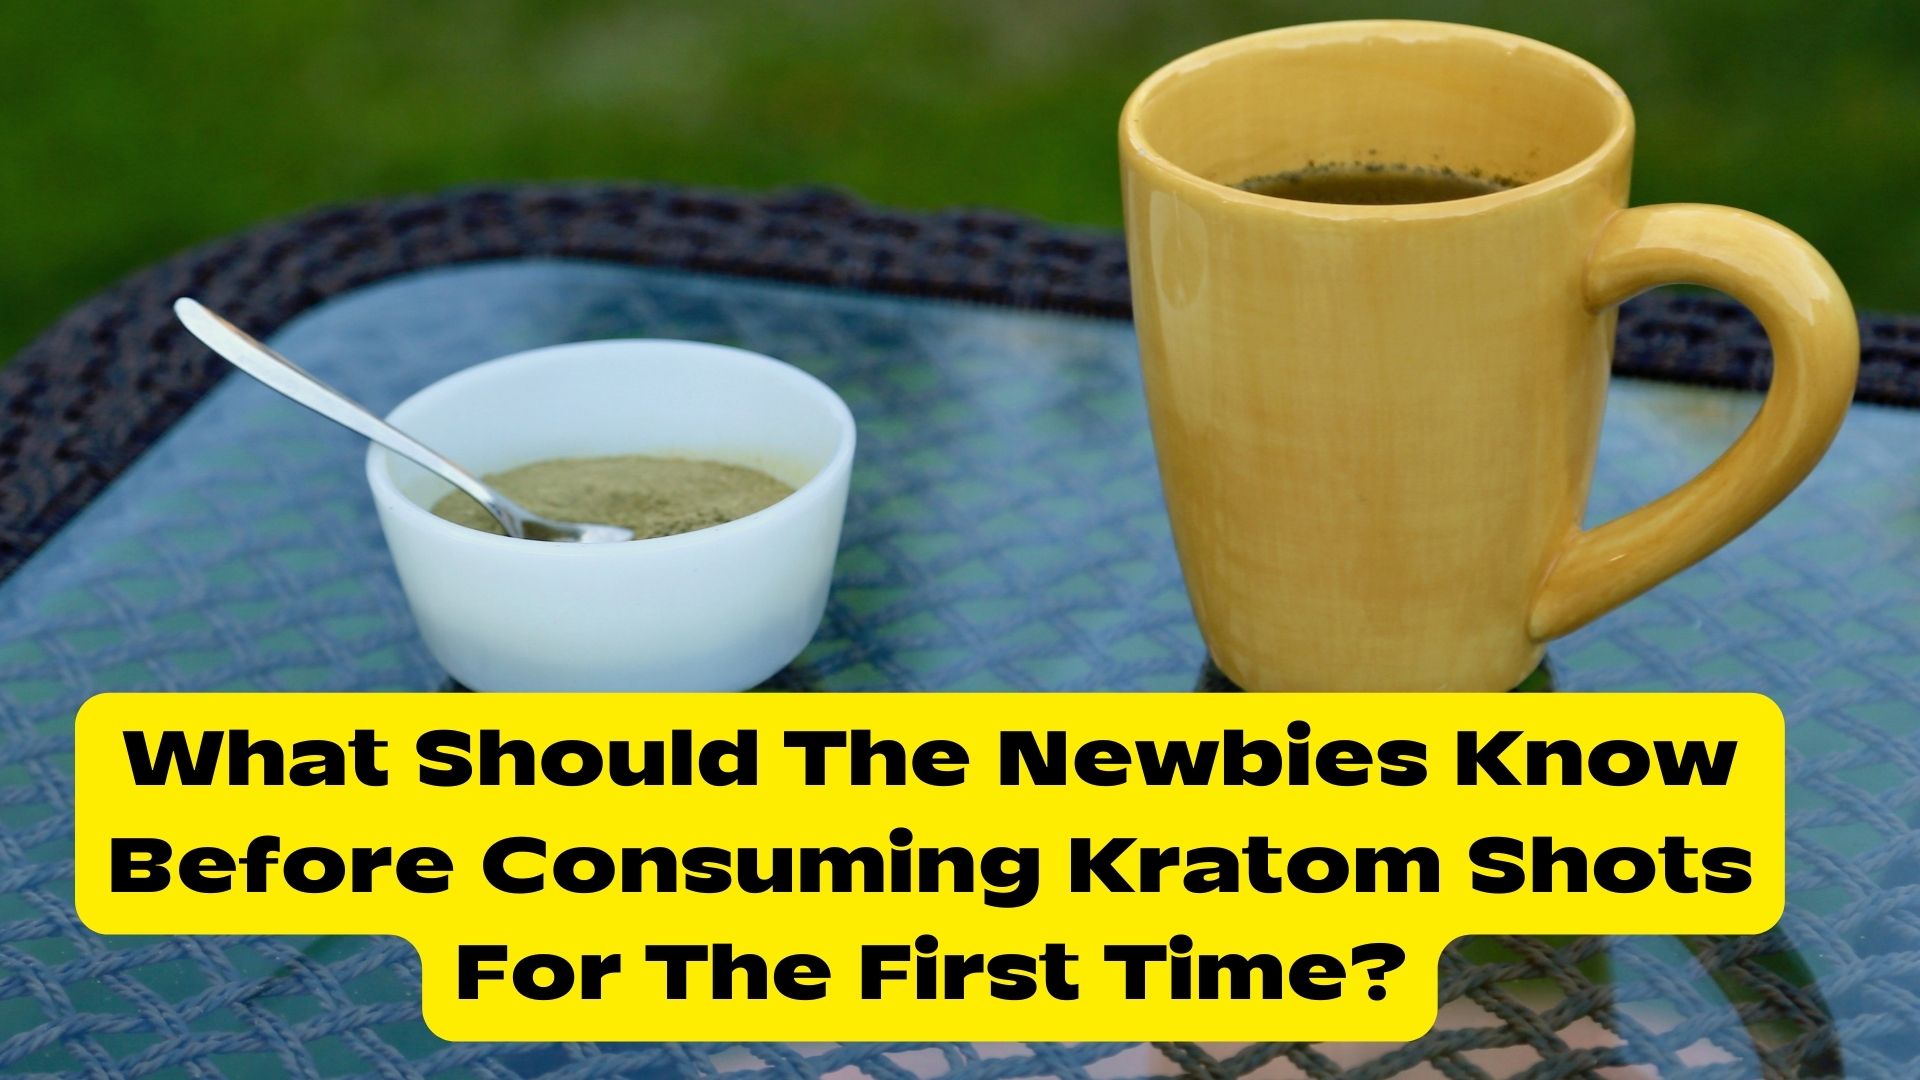 What Should The Newbies Know Before Consuming Kratom Shots For The First Time?